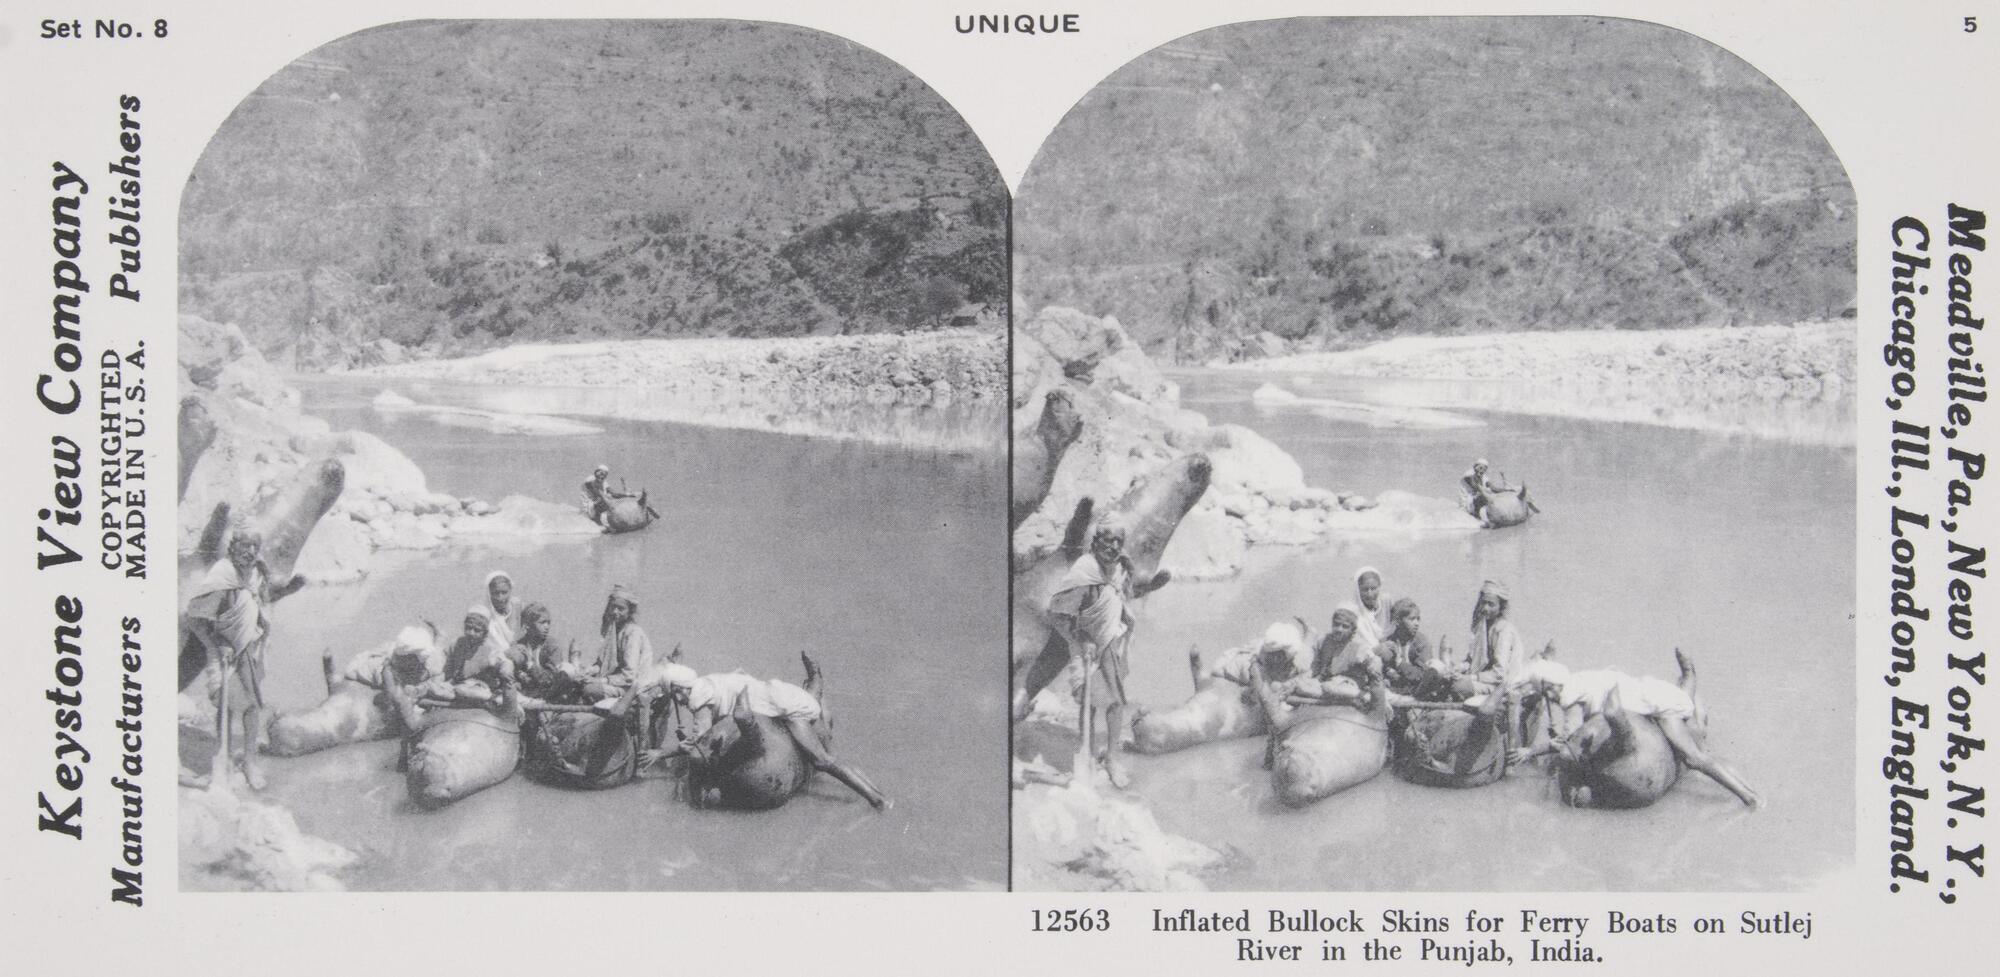 This black and white stereoscopic image features two images of a group of Indians sitting on dead animals on their backs in a river.  It is surrounded by the text: Set No. 8; Keystone View Company; Unique; Inflated Bullock Skins for Ferry Boats on Sutlej River in the Punjab, India.<br />